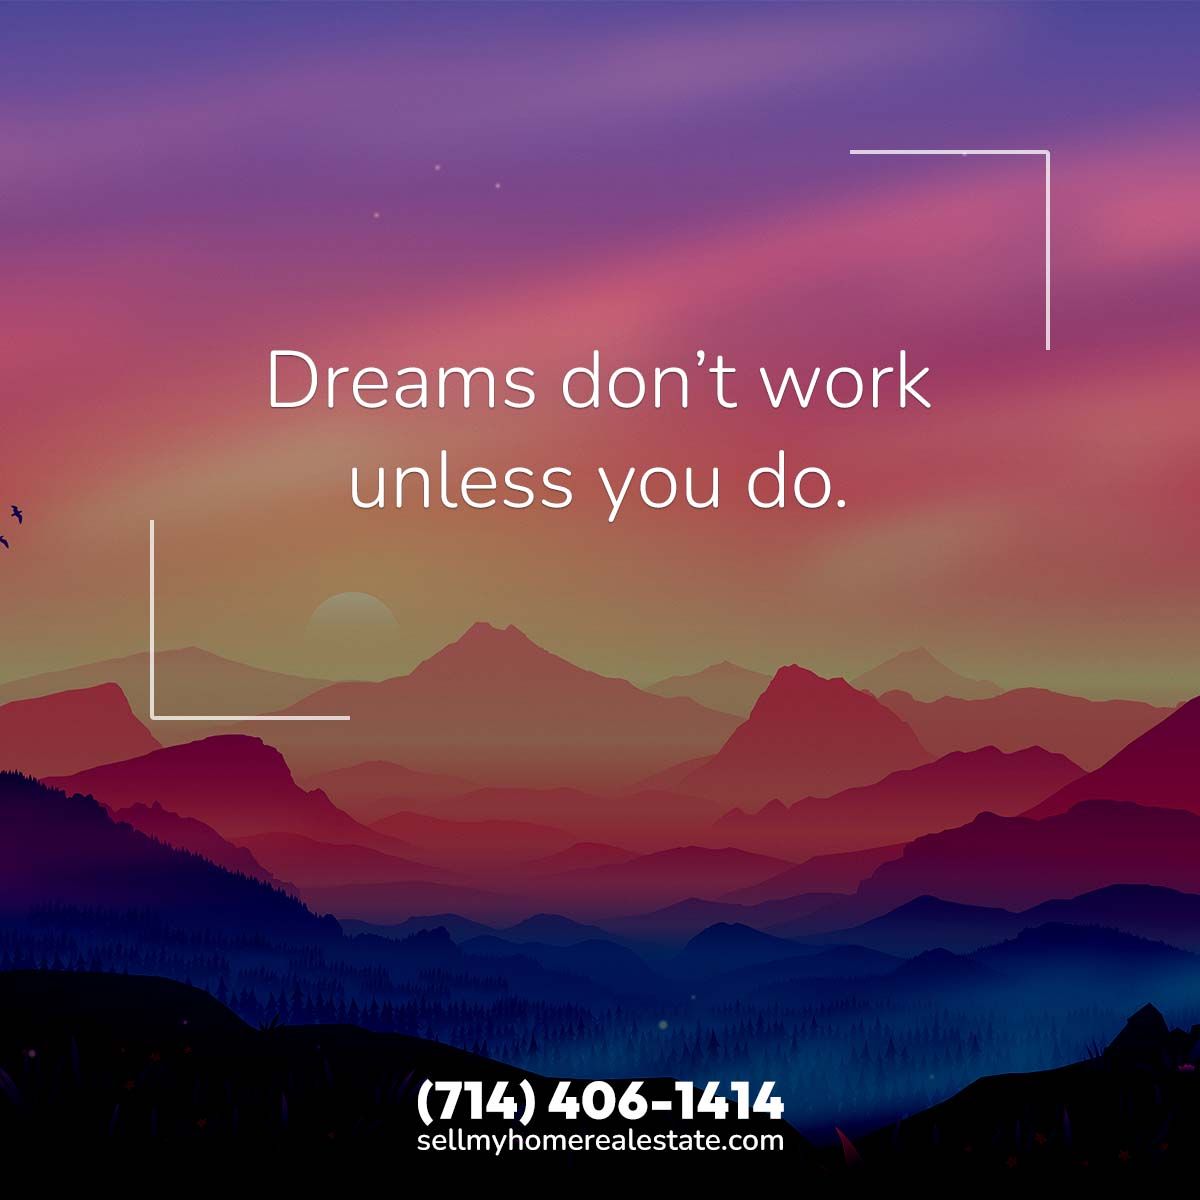 Dreams don't work unless you do

#realestate #realestateagent #realestateexpert #sellmyhome #sellmyhomerealty #yourhomesoldguaranteed #orangecountyrealestate #orangecountyrealtor #motivationalmonday